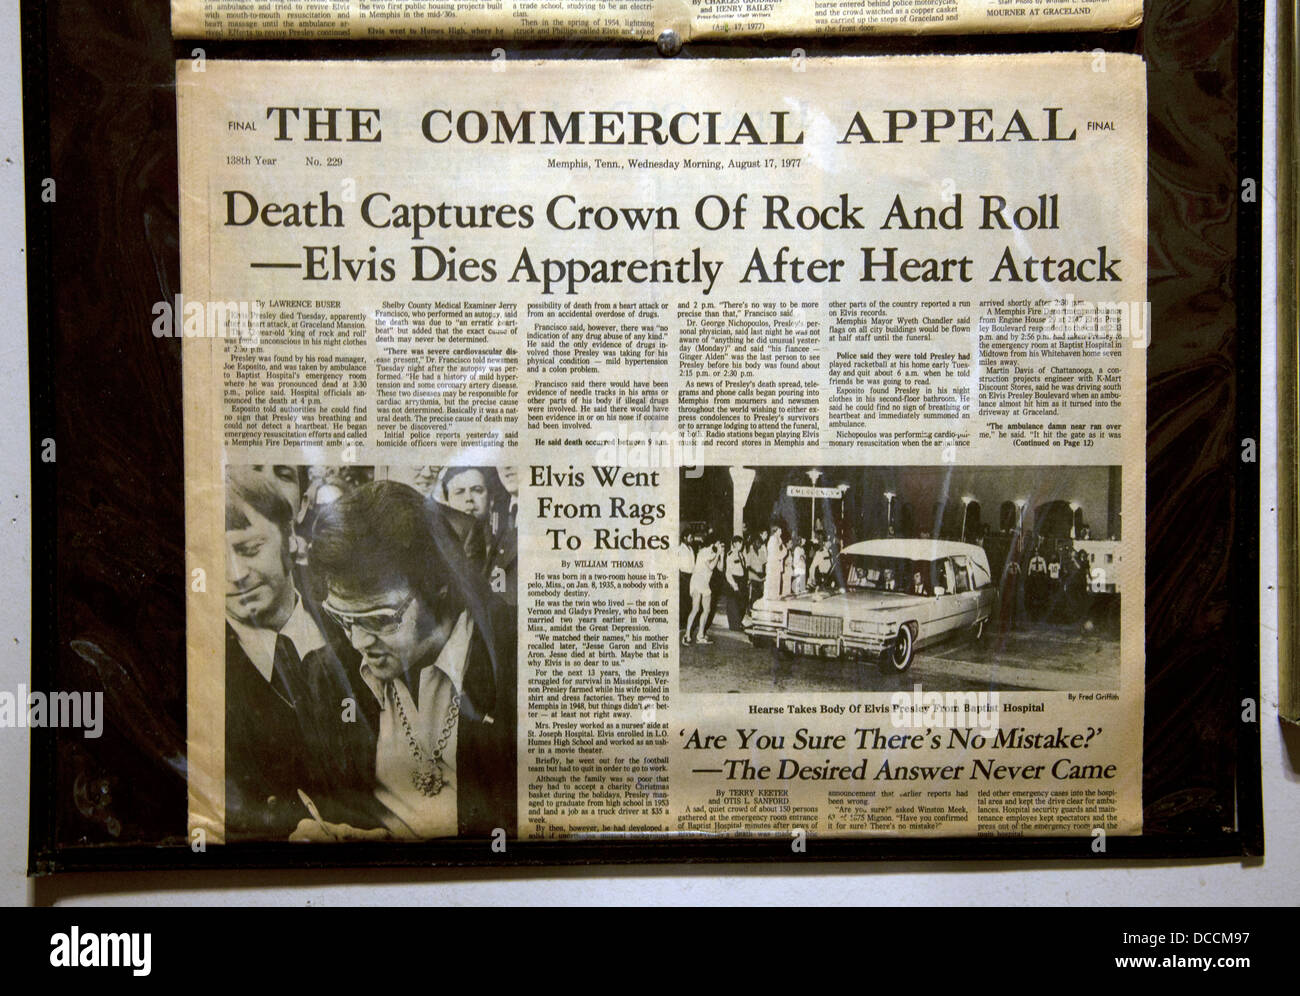 The Commercial Appeal newspaper front page on the day that Elvis Presley died on display at Sun Studios in Memphis Stock Photo